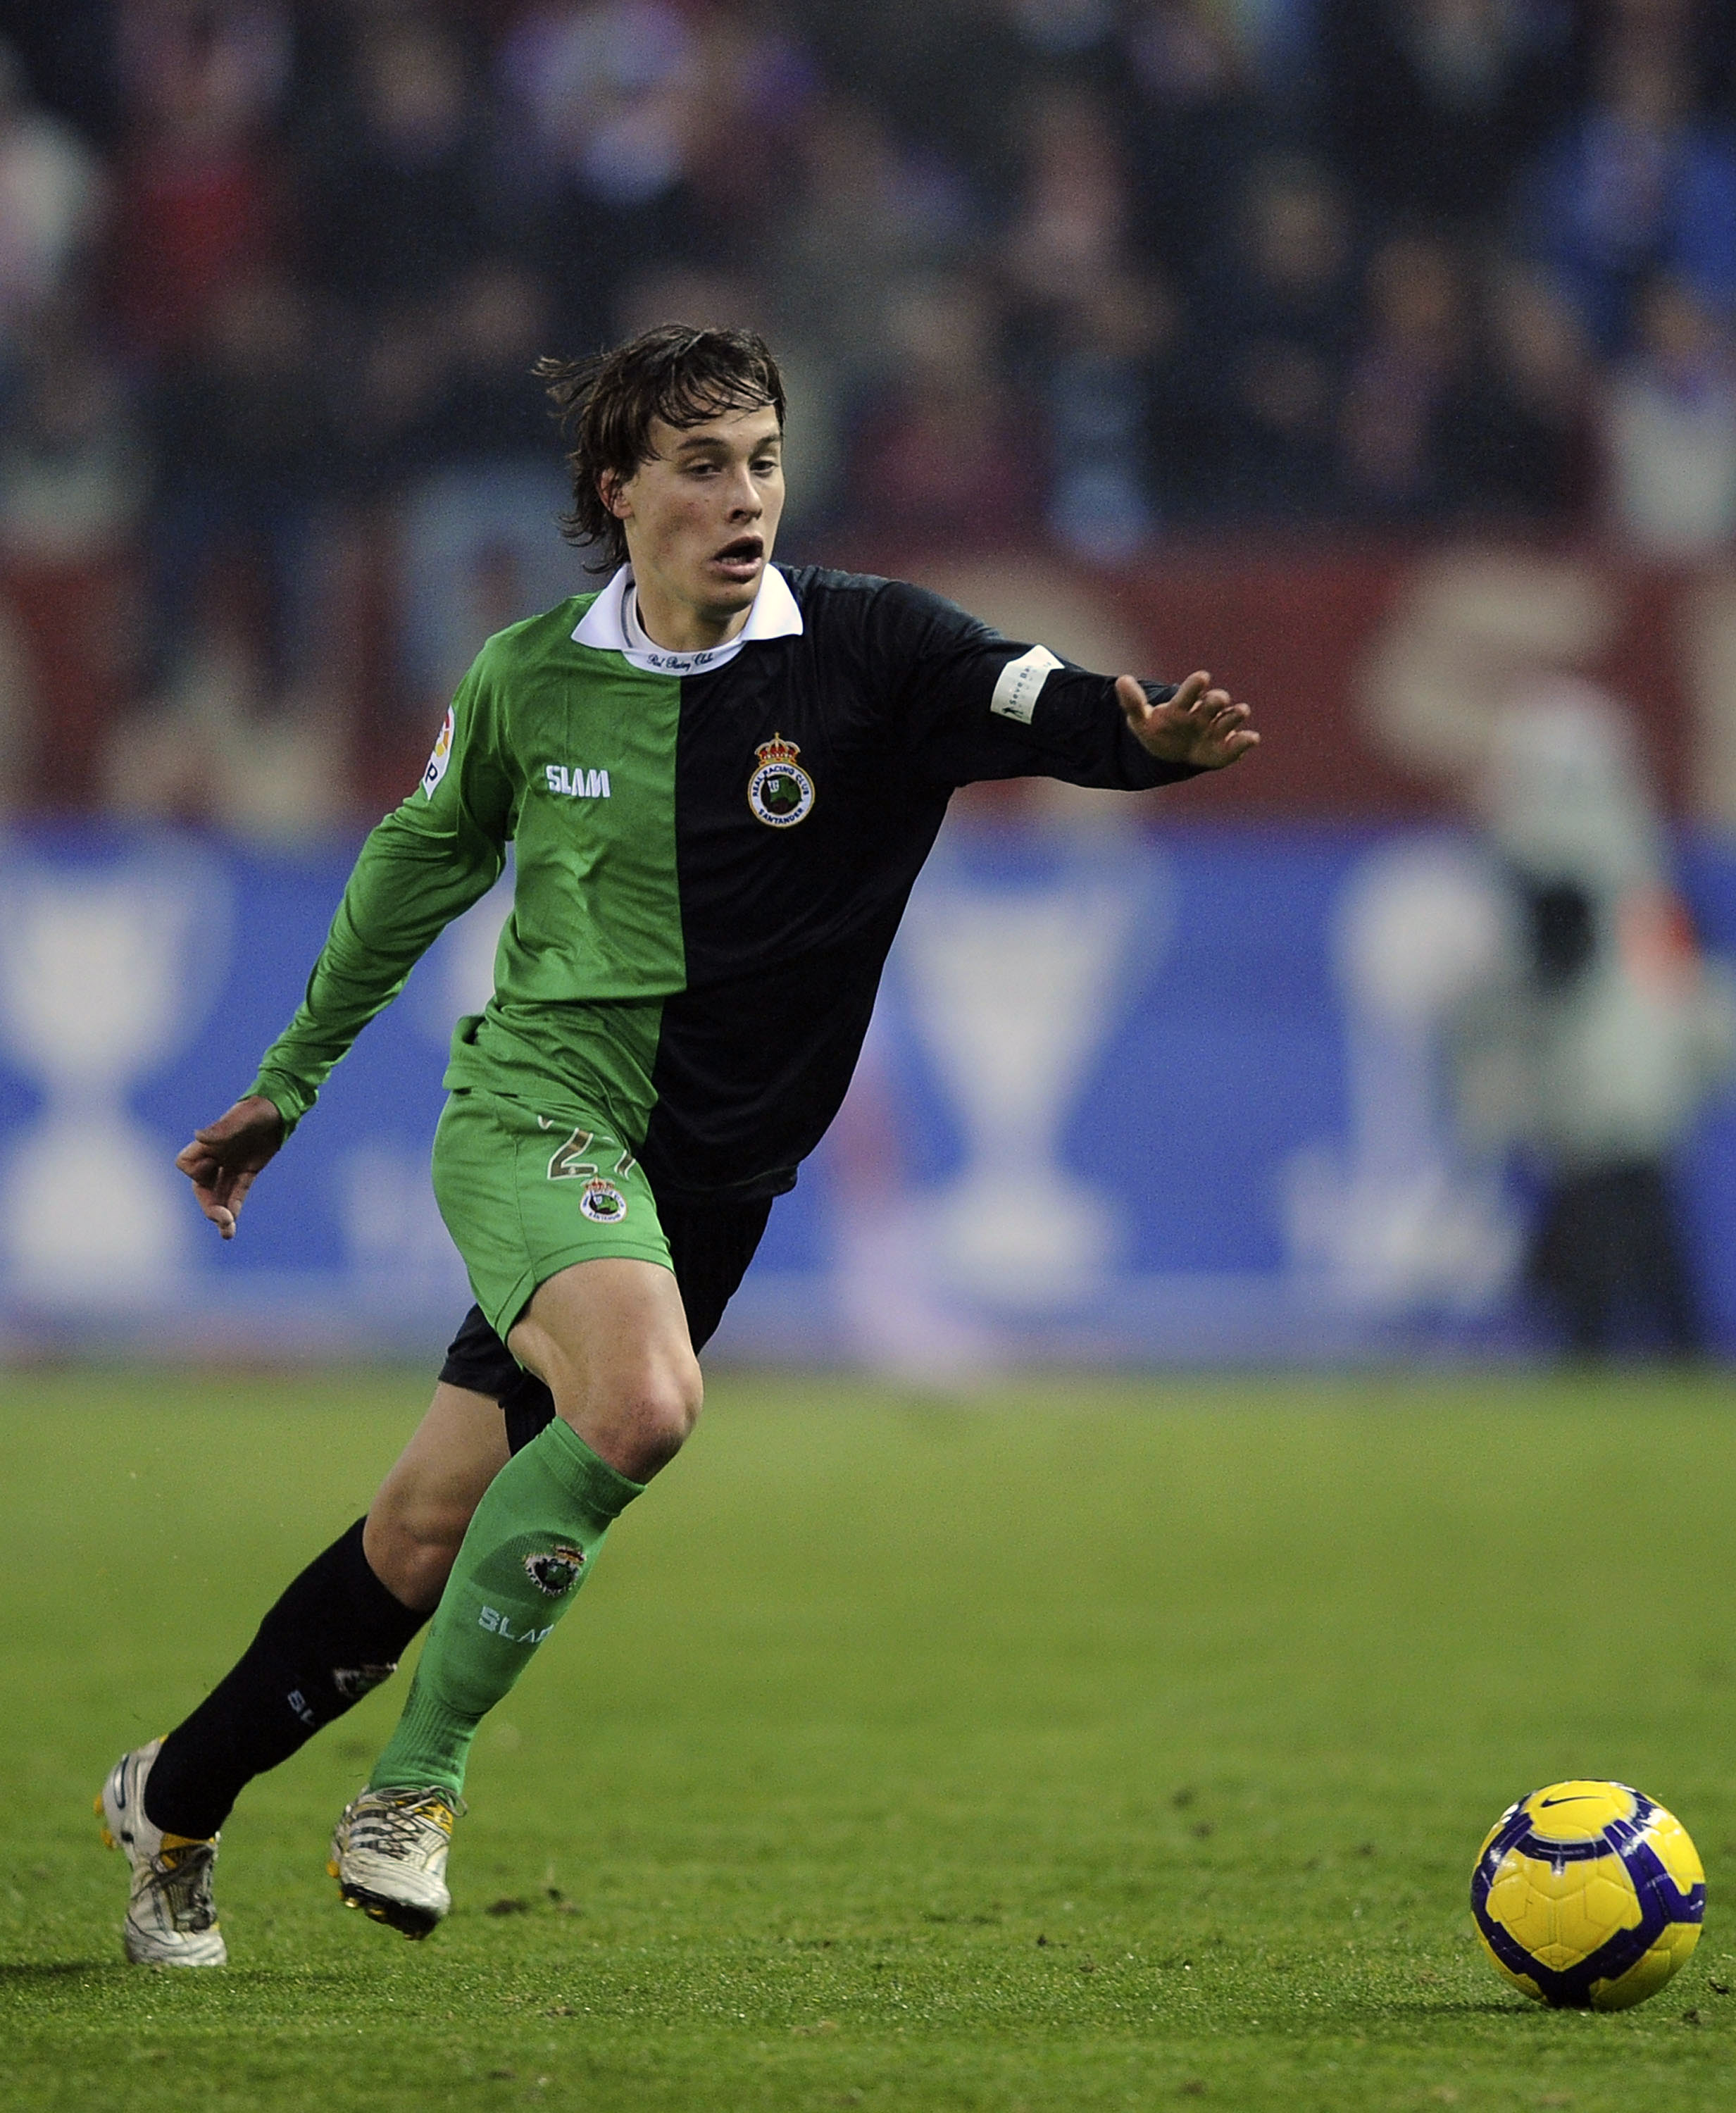 MADRID, SPAIN - FEBRUARY 04:  Sergio Canales of Racing Santander in action during the Copa del Rey semi-final, first leg match between Atletico Madrid and Racing Santander at the Vicente Calderon Stadium on February 4, 2010 in Madrid, Spain.  (Photo by De